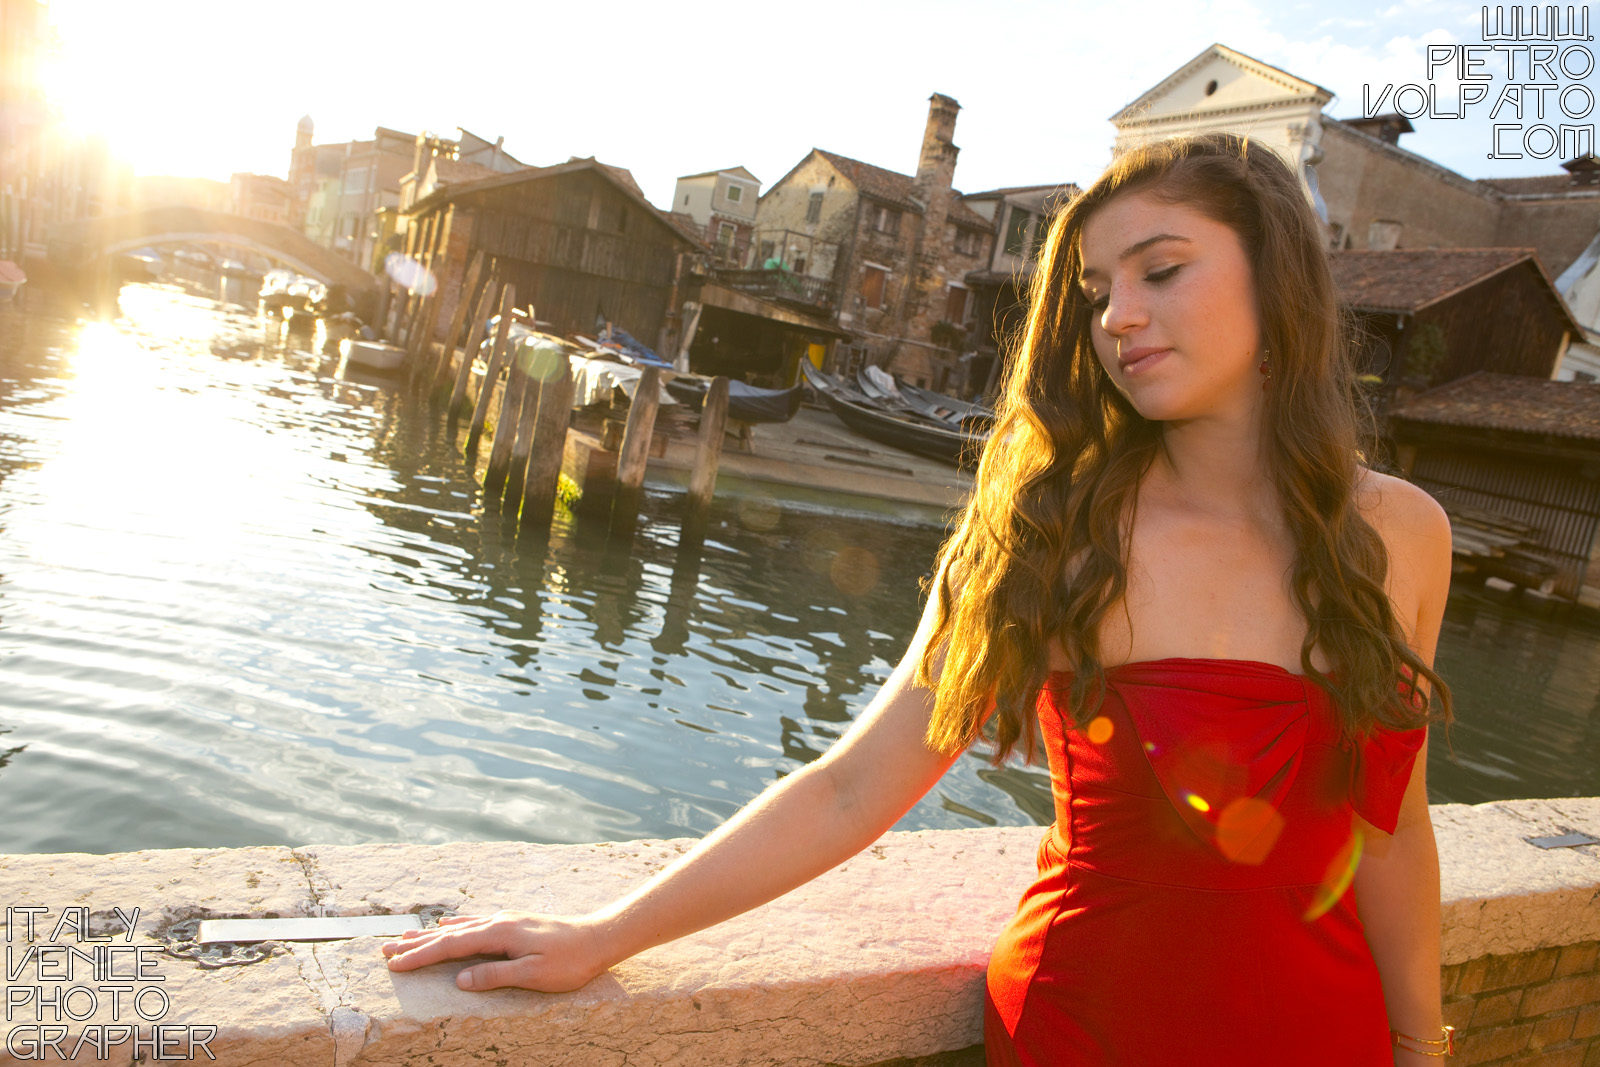 Professional photographer in Venice for senior portrait photography session - fashion photo shoot and tour in Venice